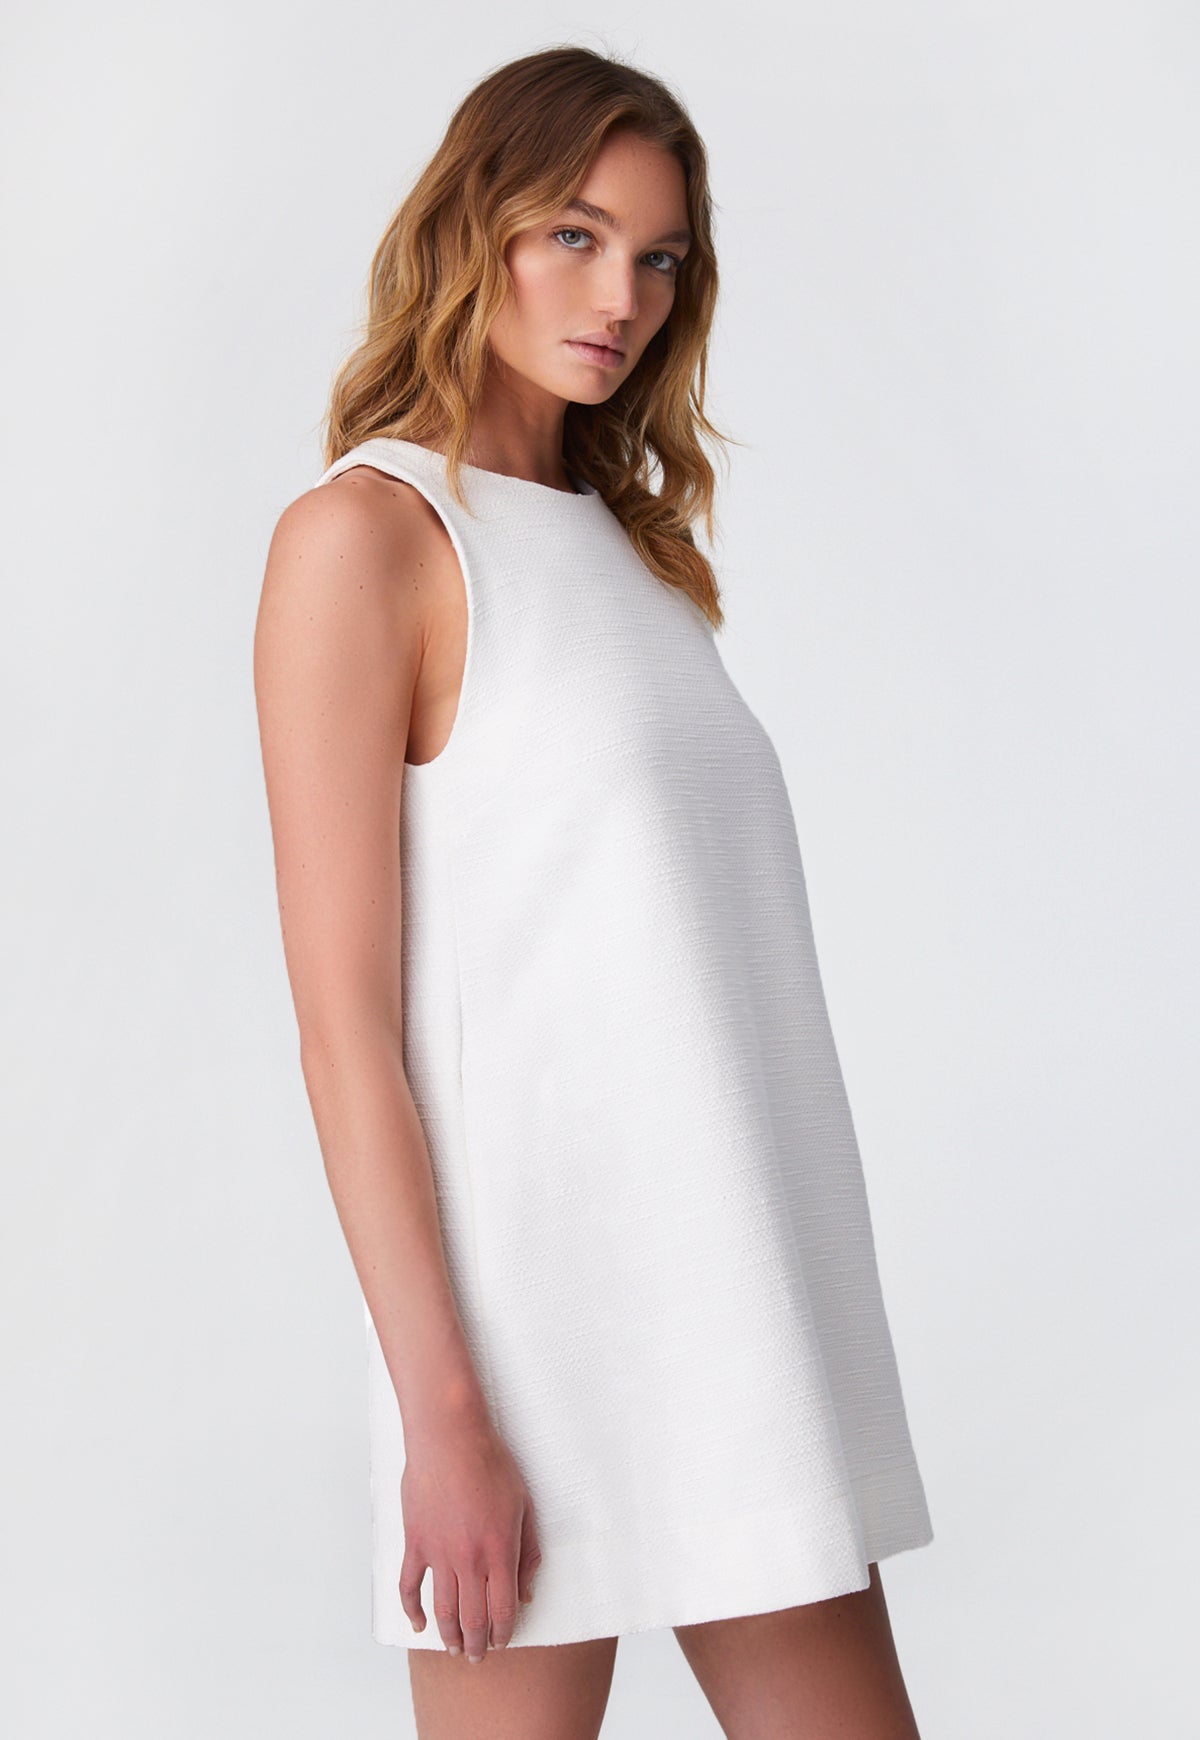 THE SHIFT DRESS in WHITE TEXTURED COTTON